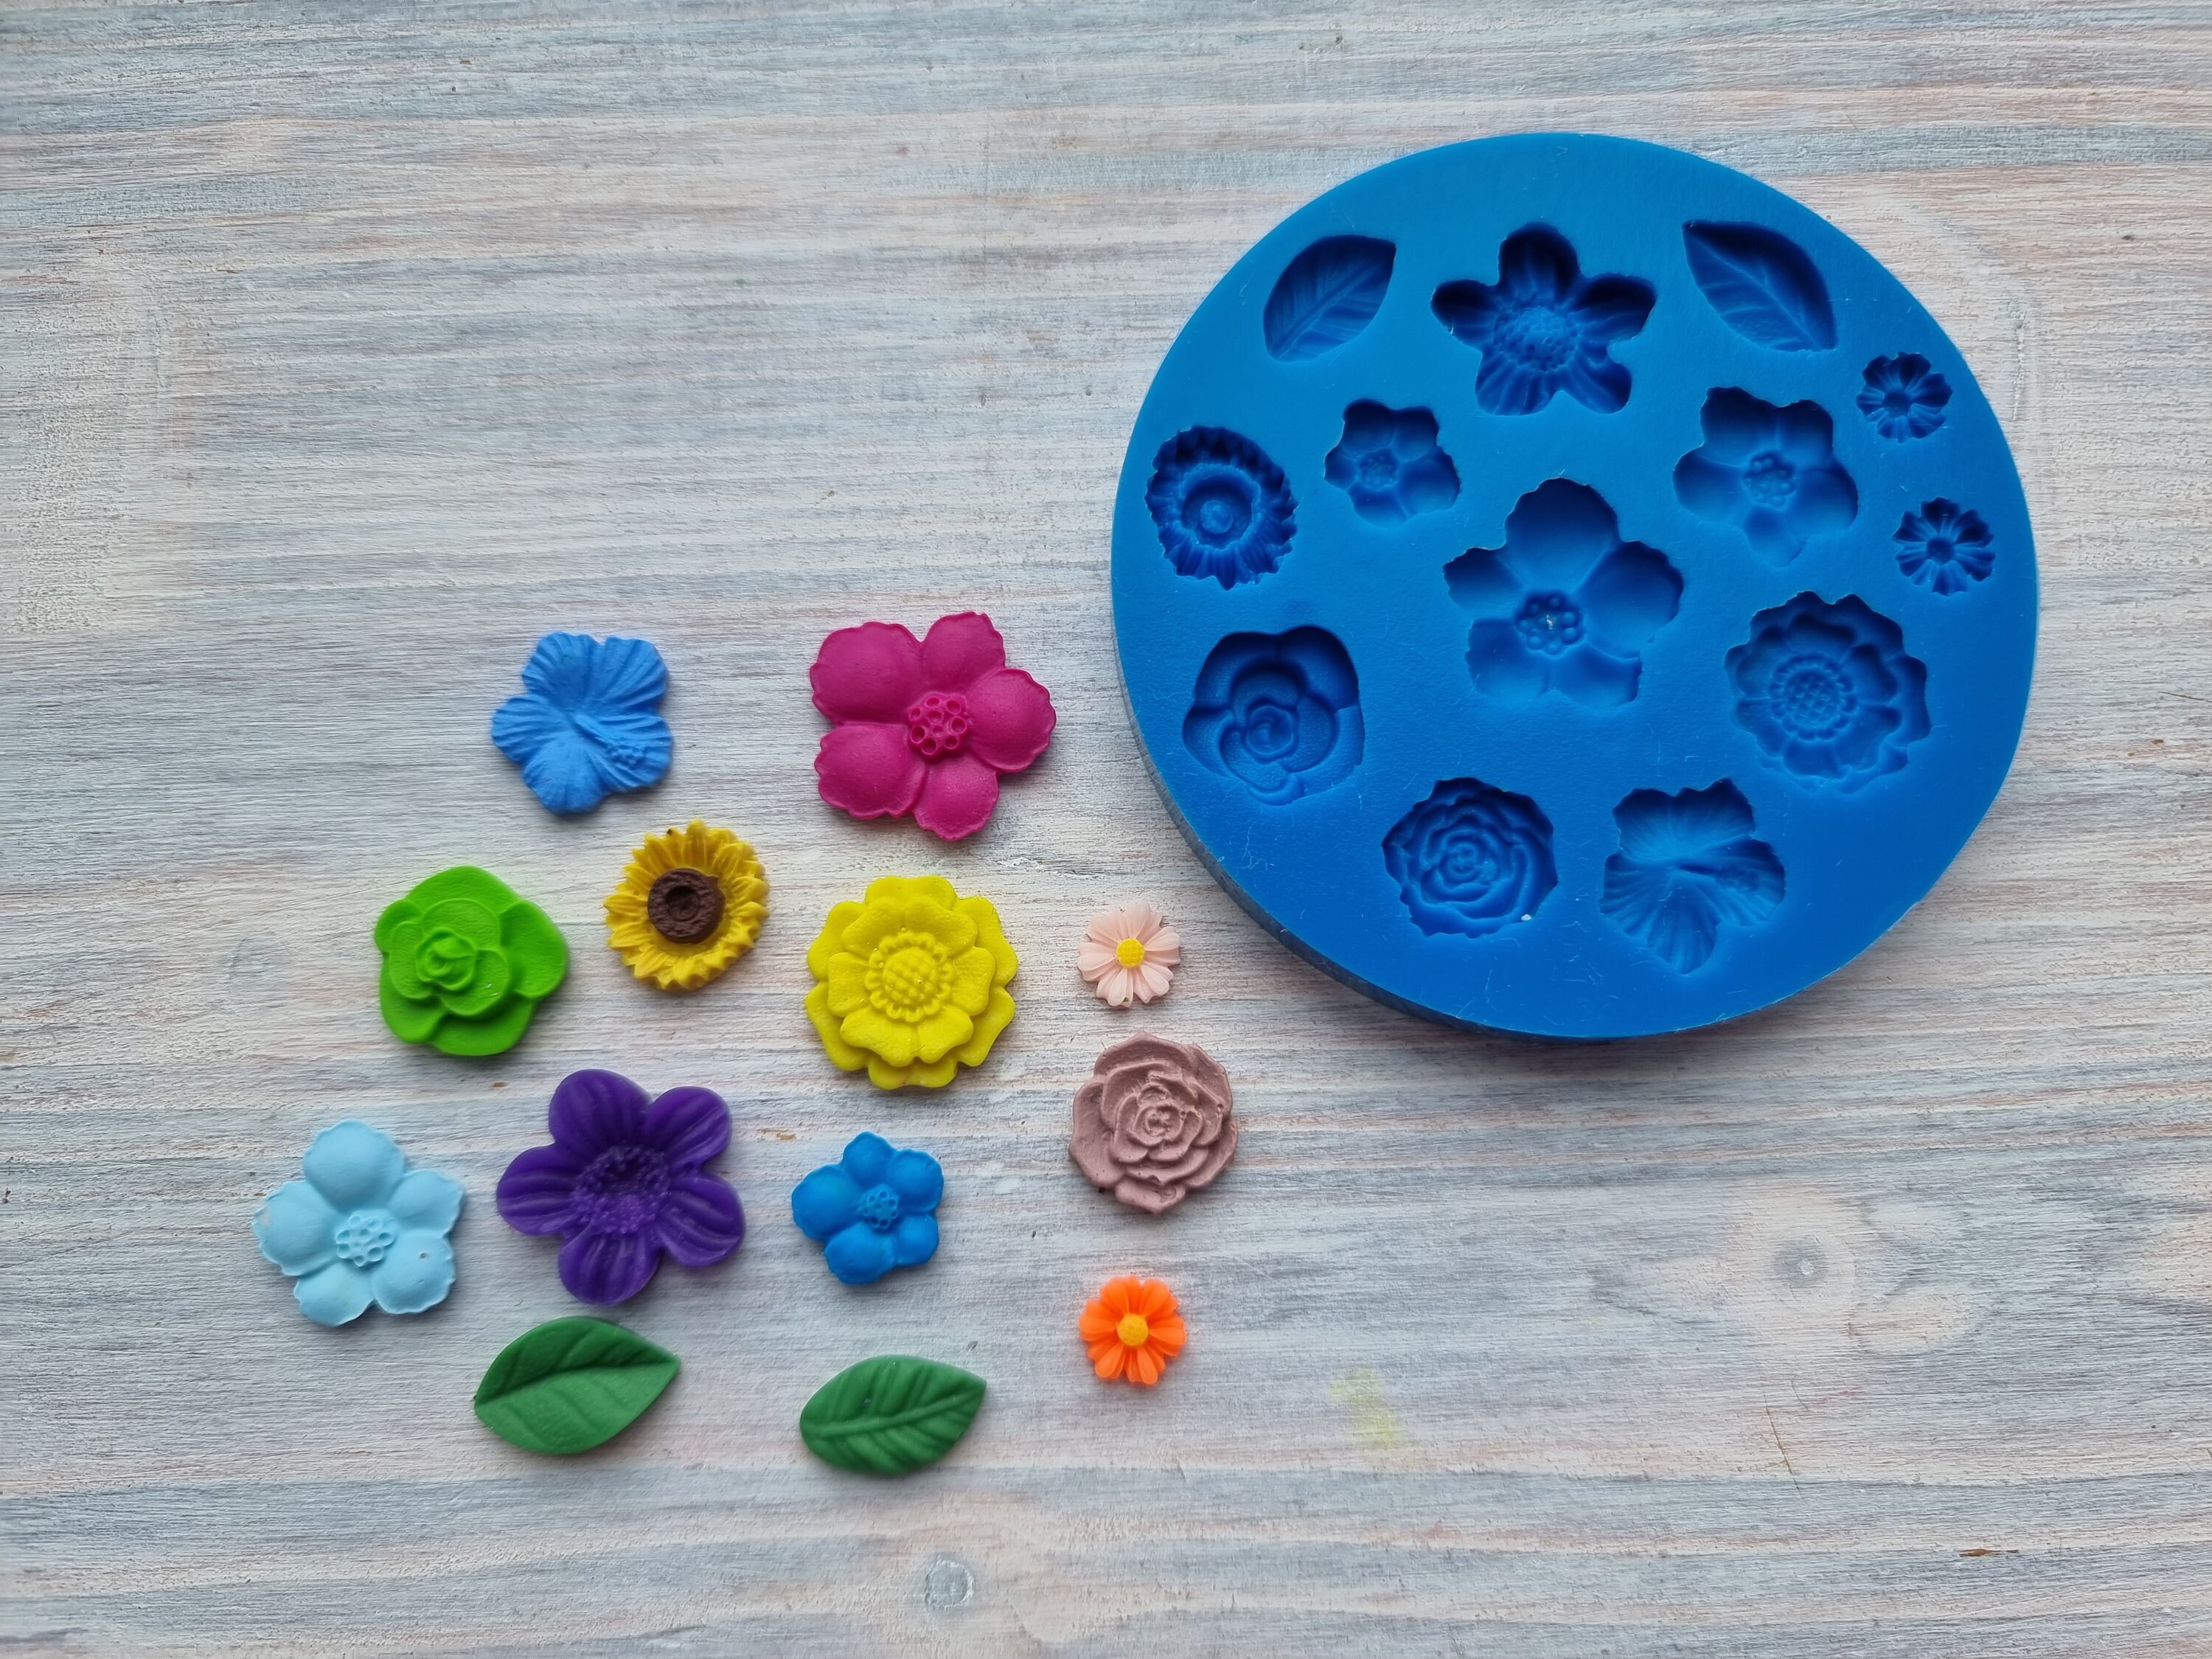  Flower Molds 3 Pieces Flower Silicone Mold Flowers Fondant Mold  Set for Cake,Chocolate, Cupcake, Candy,Sugarcraft Decoration Polymer Clay  Mold for Soap, Jewelry Casting DIY Crafting Projects